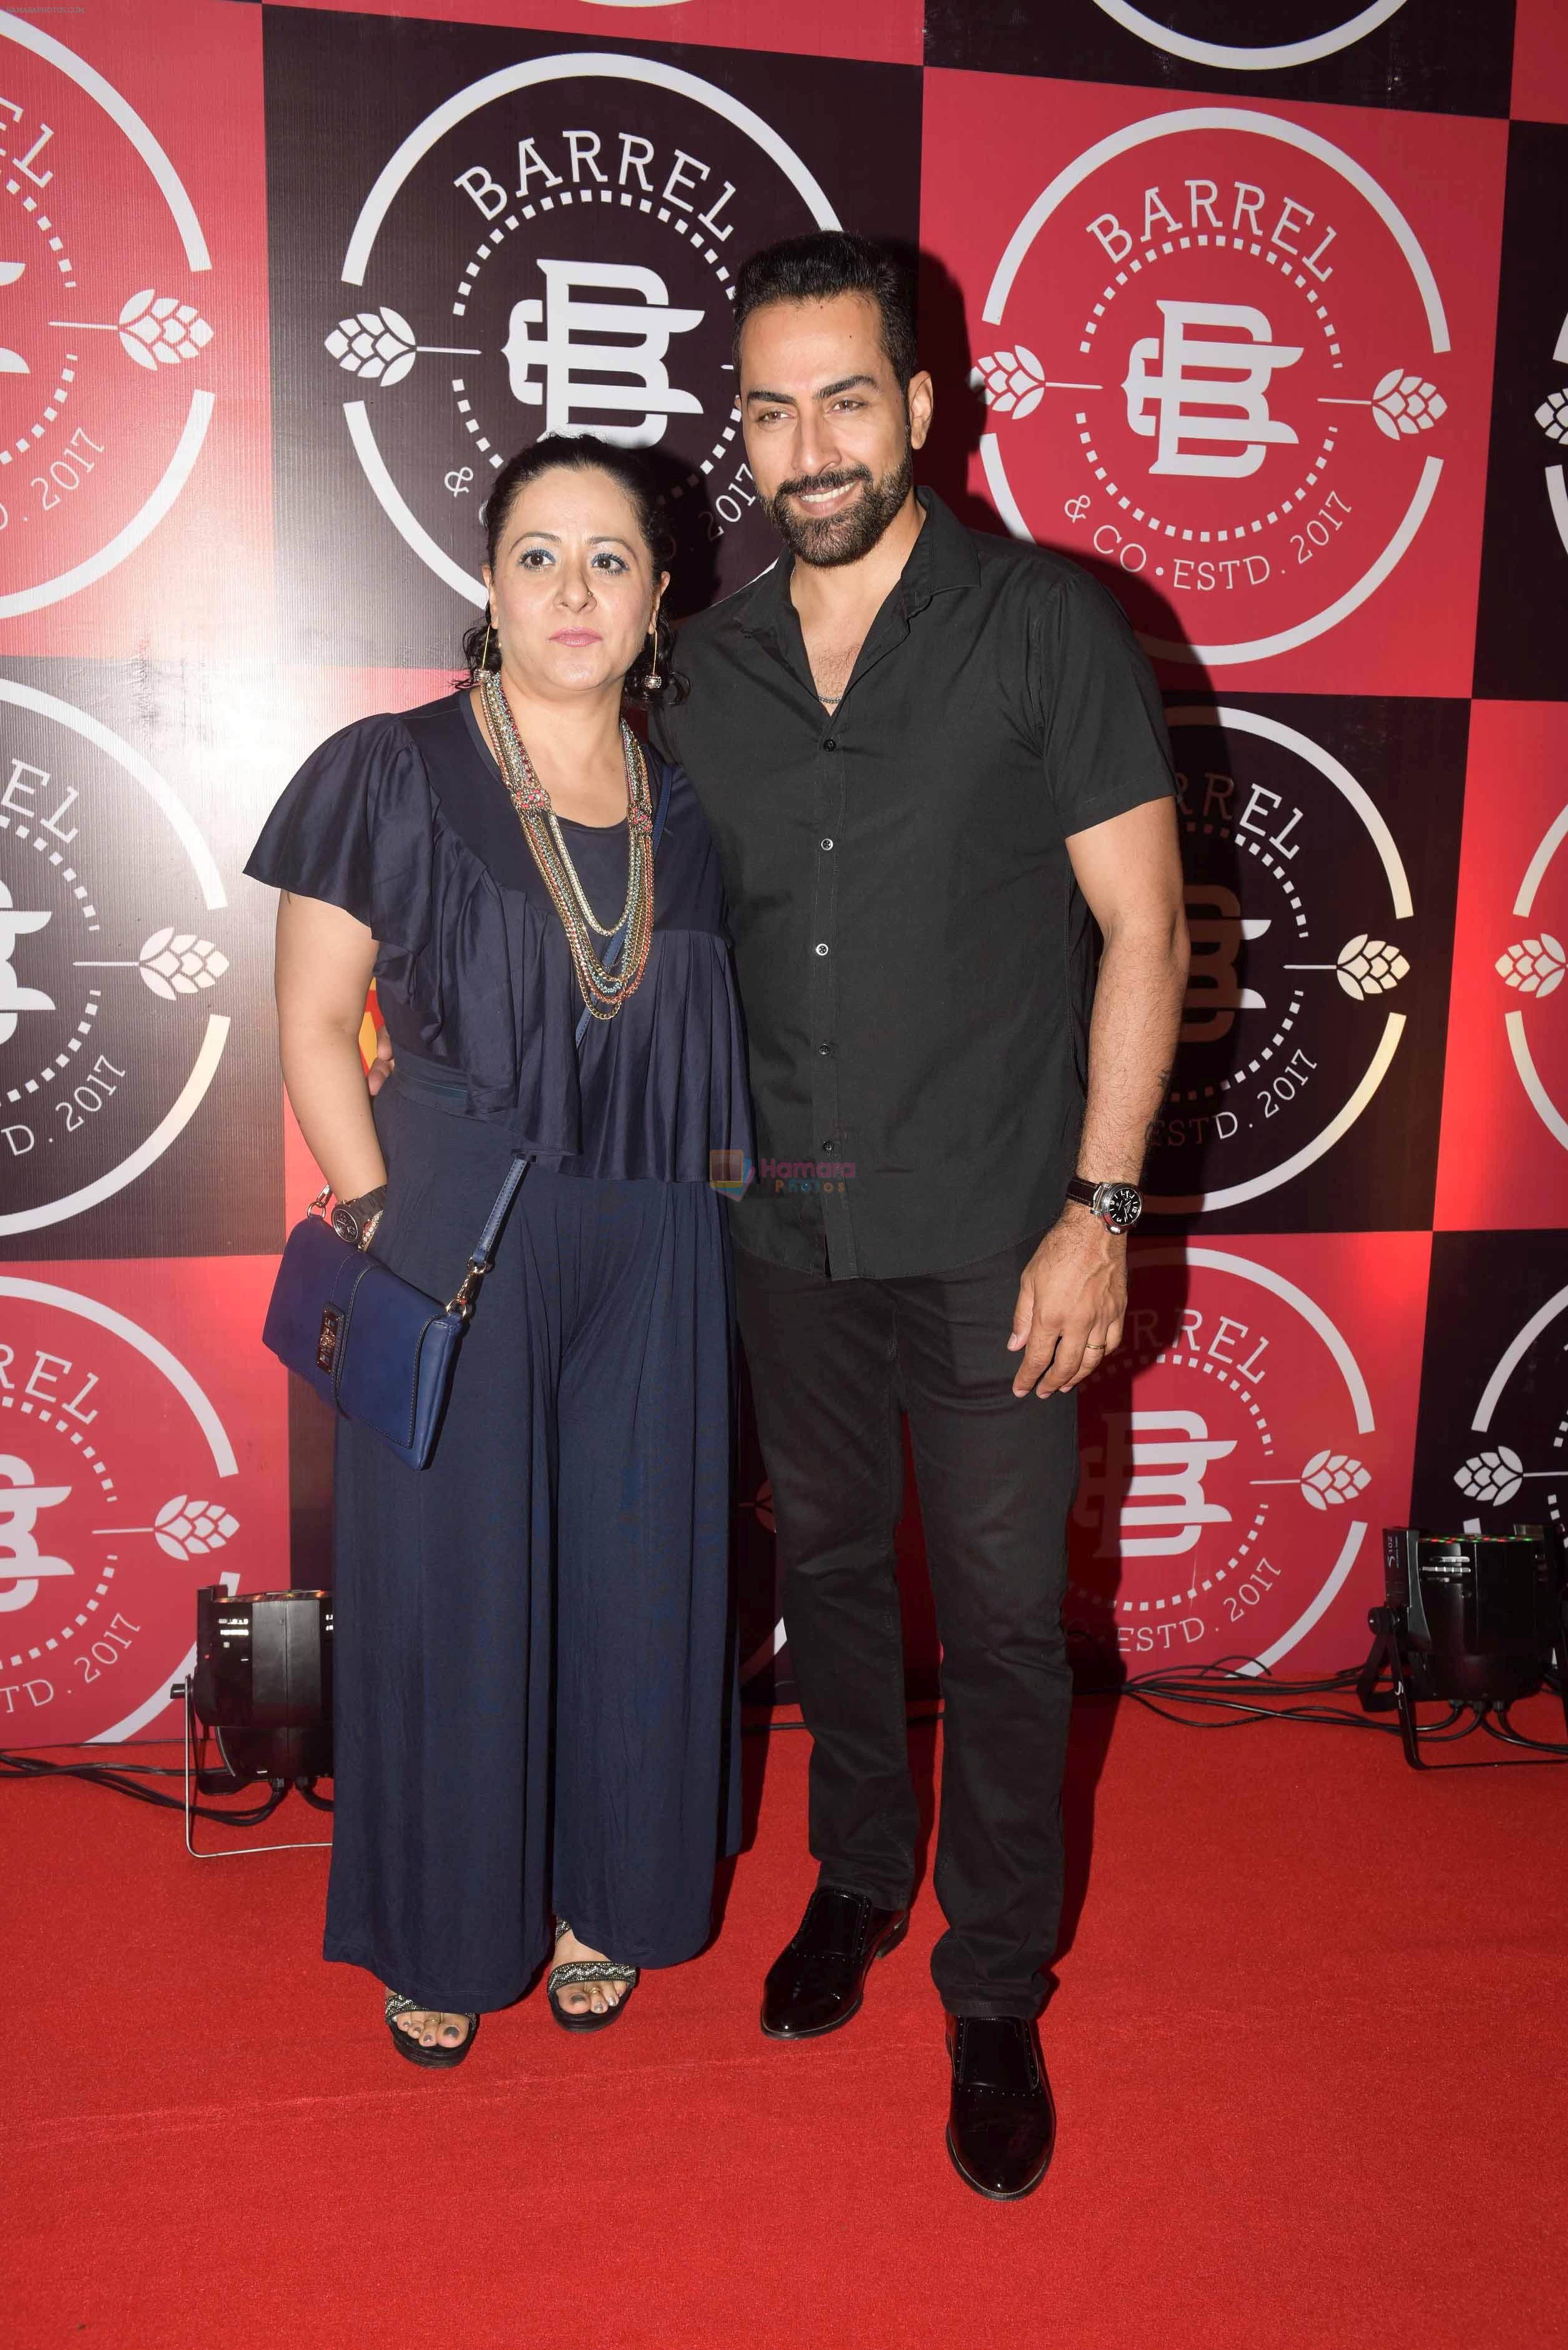 Mona Pandey and Sudhanshu Pandey at the Launch Party of Barrel & Co on 7th Sept 2017